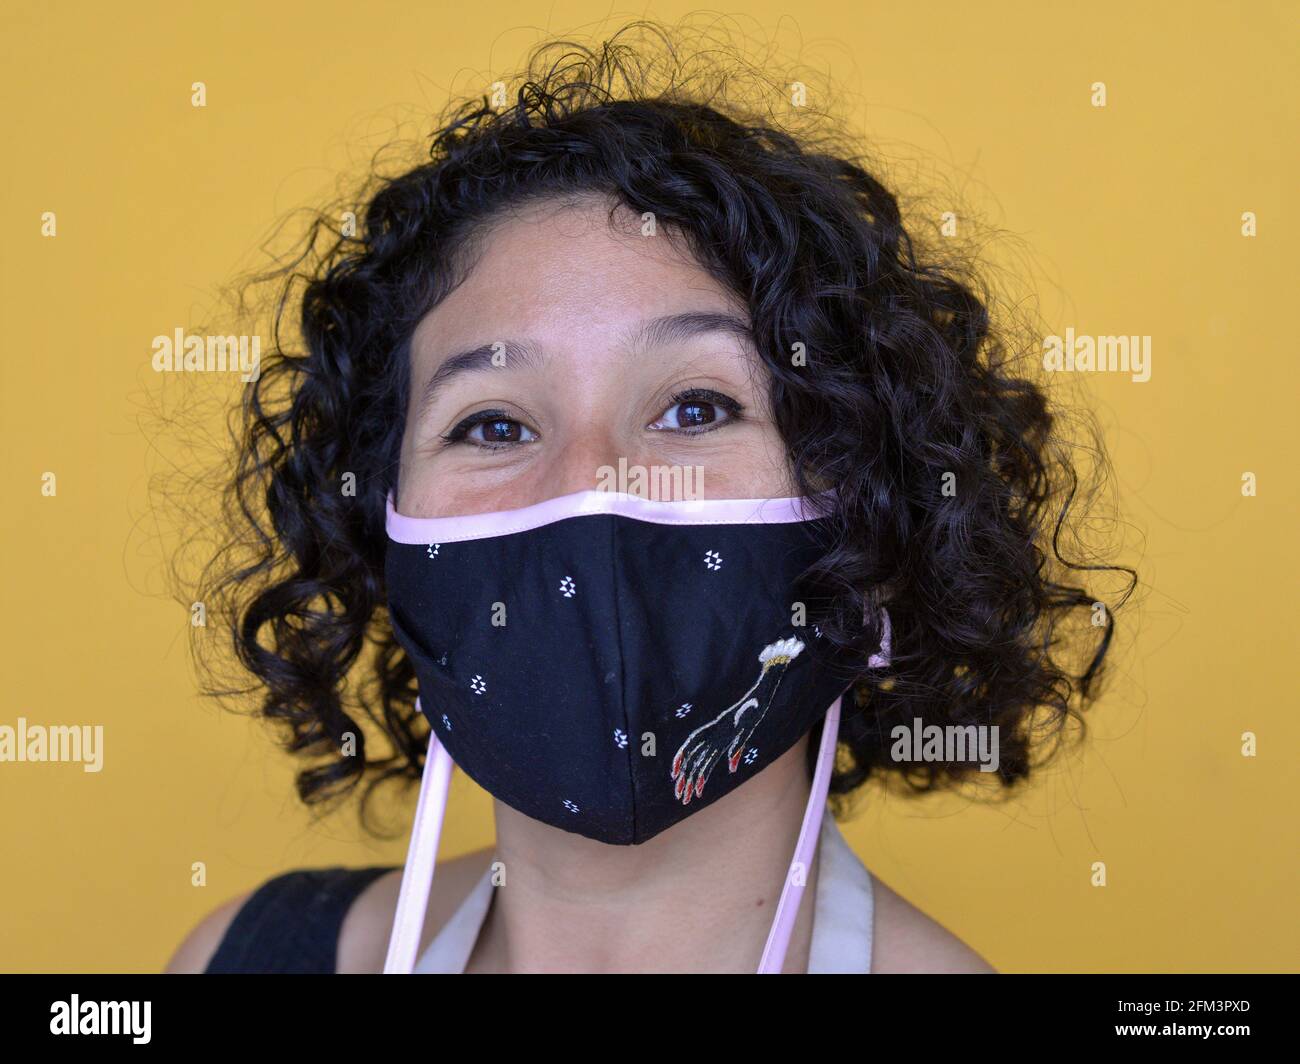 Young Mexican woman with corkscrew curls wears stylish non-medical cloth face mask during the global coronavirus pandemic and looks at camera. Stock Photo